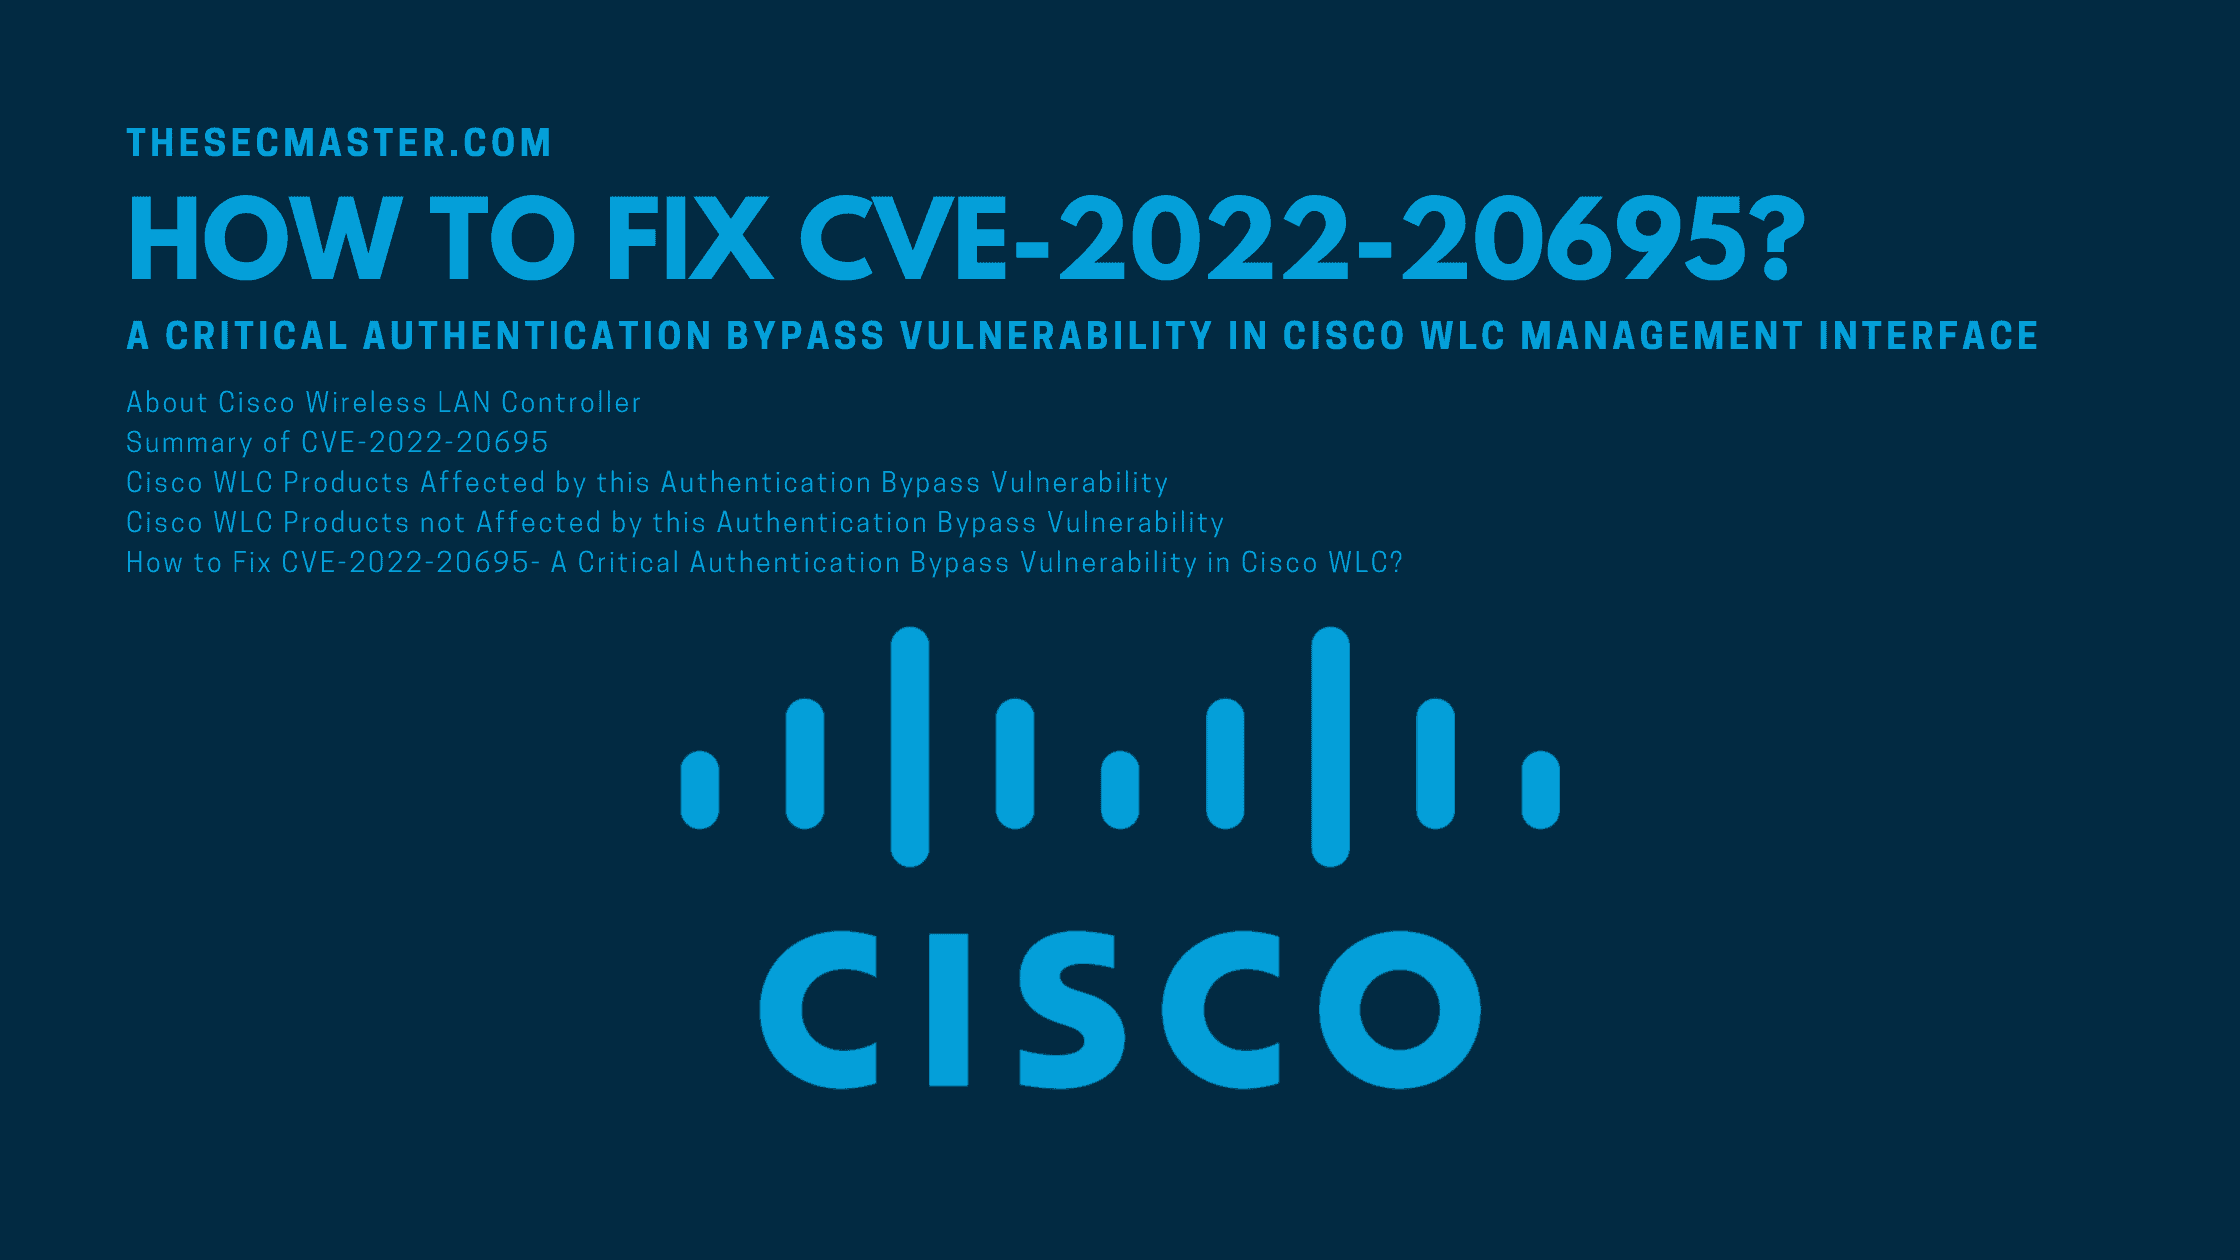 How To Fix Cve 2022 20695 A Critical Authentication Bypass Vulnerability In Cisco Wlc Management Interface